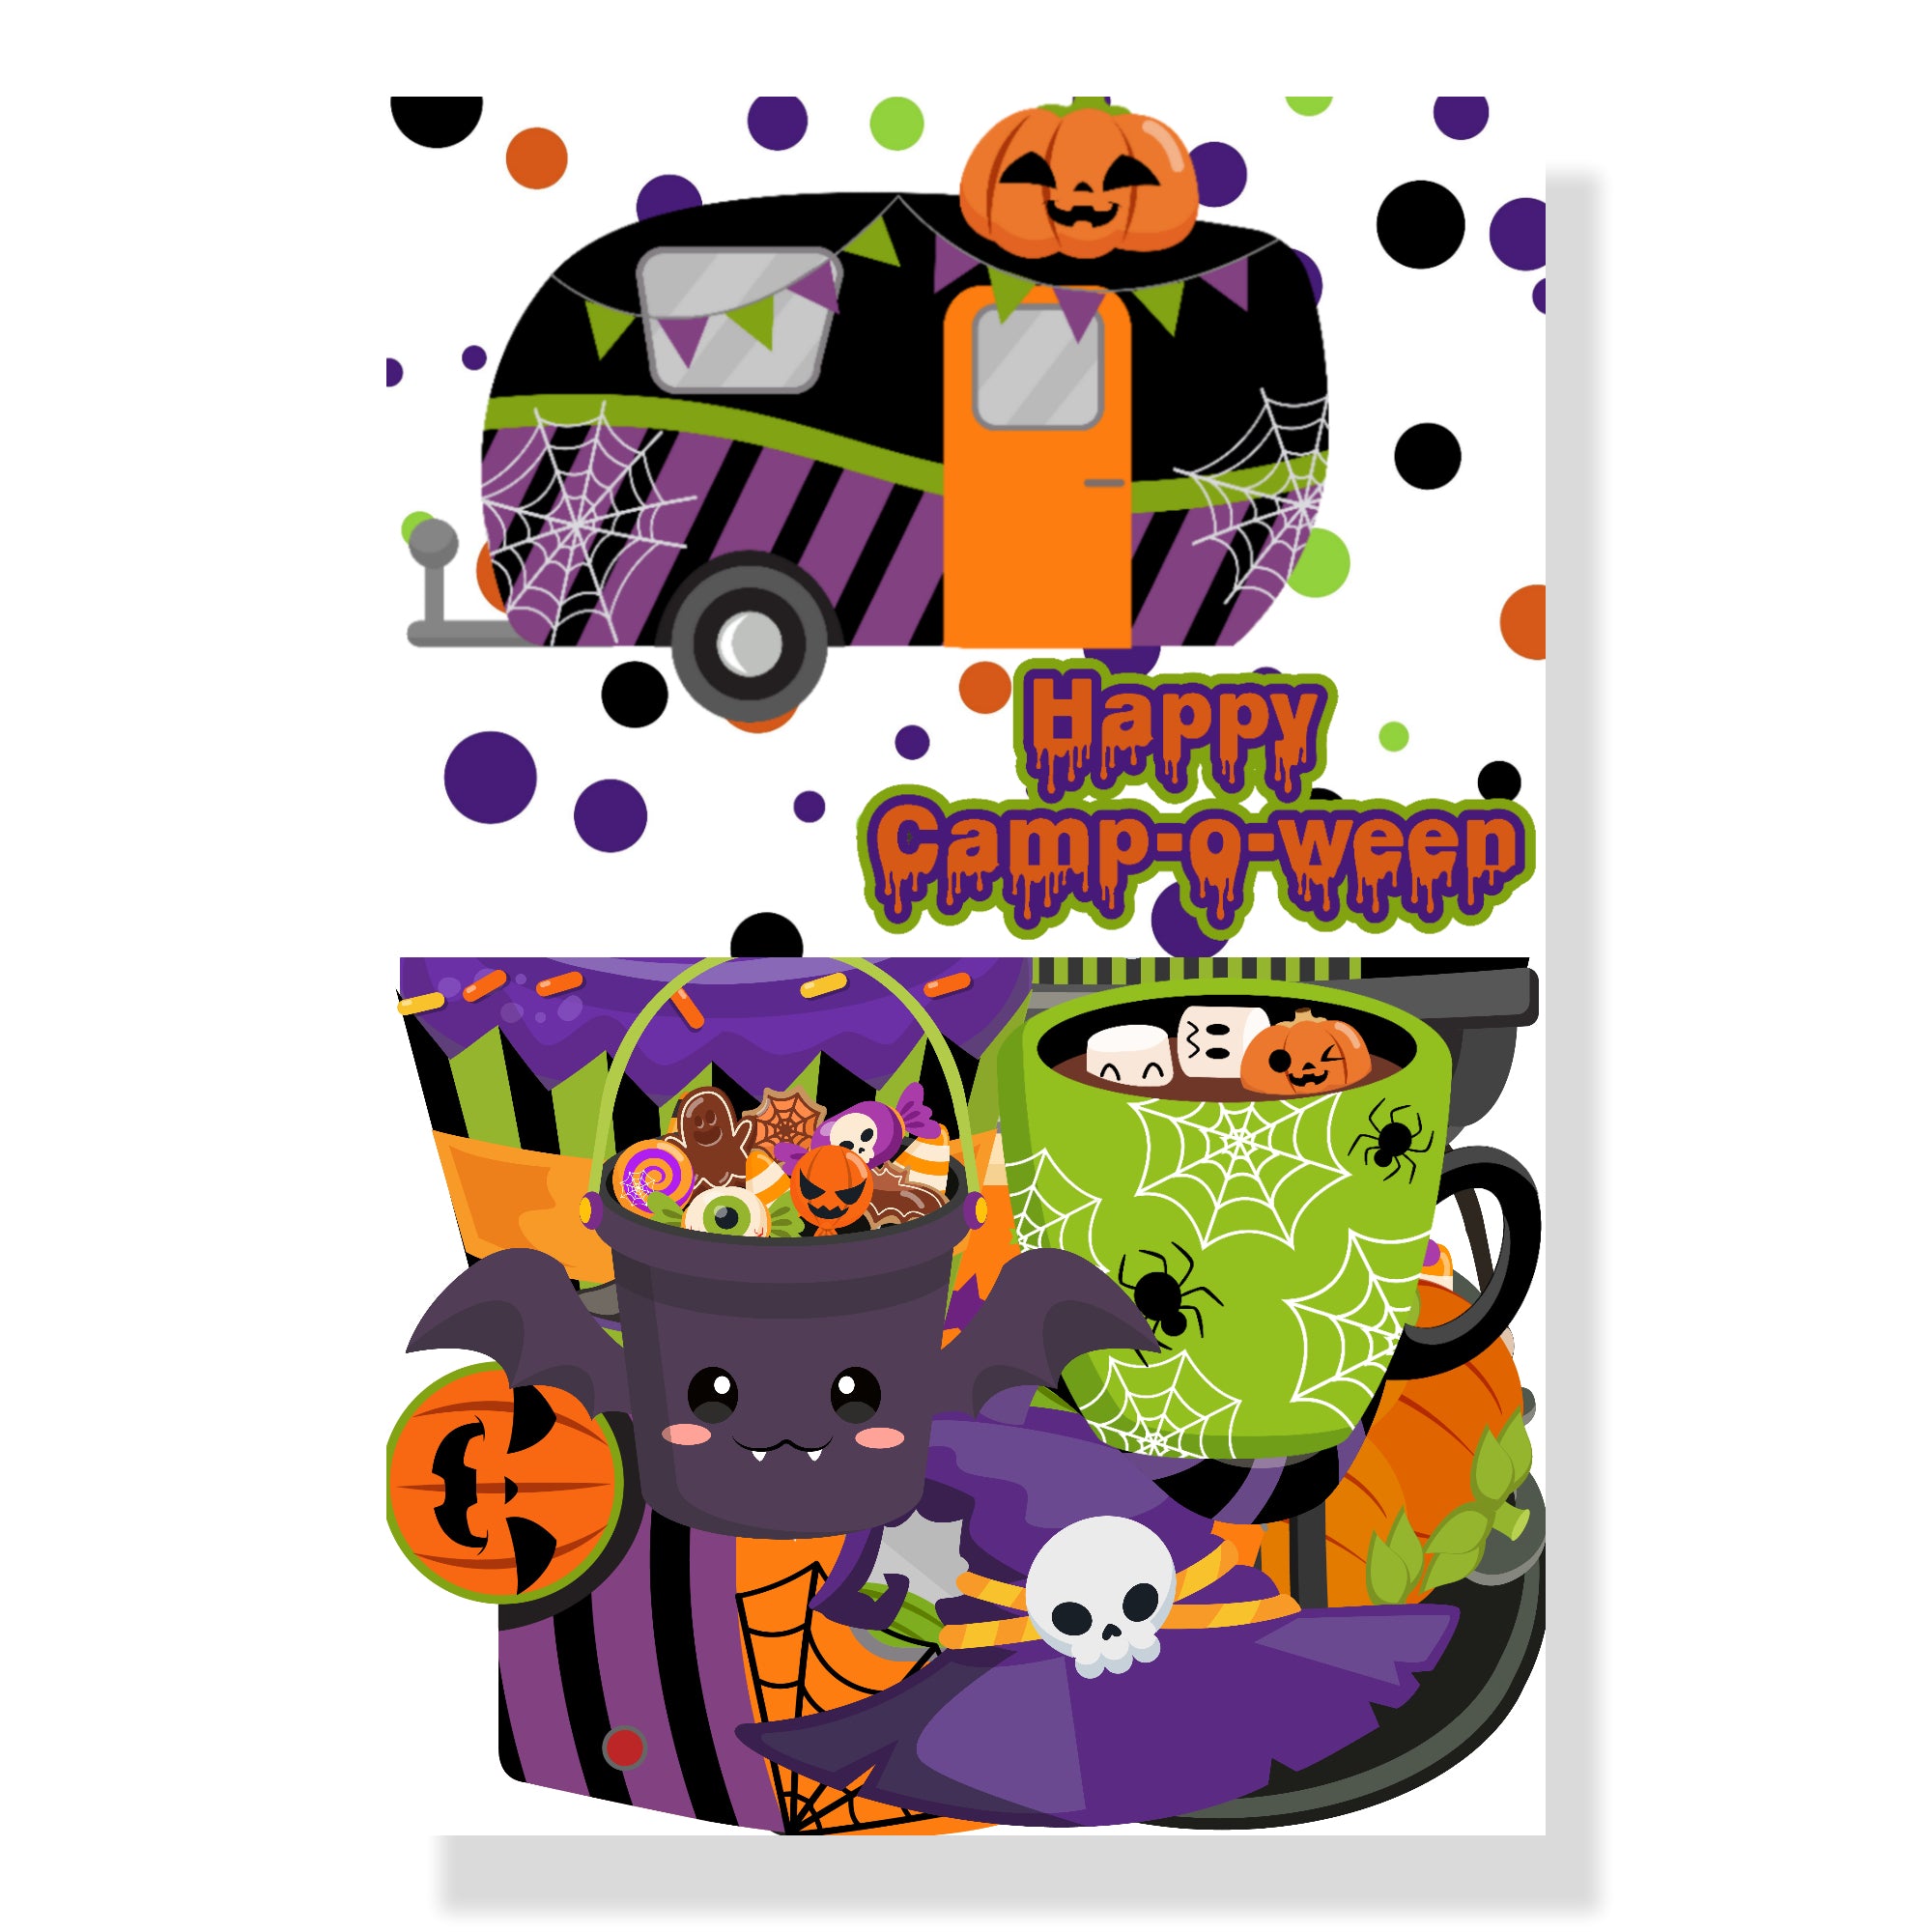 Happy Camp-o-ween 12 x 12 Scrapbook Collection Kit by SSC Designs